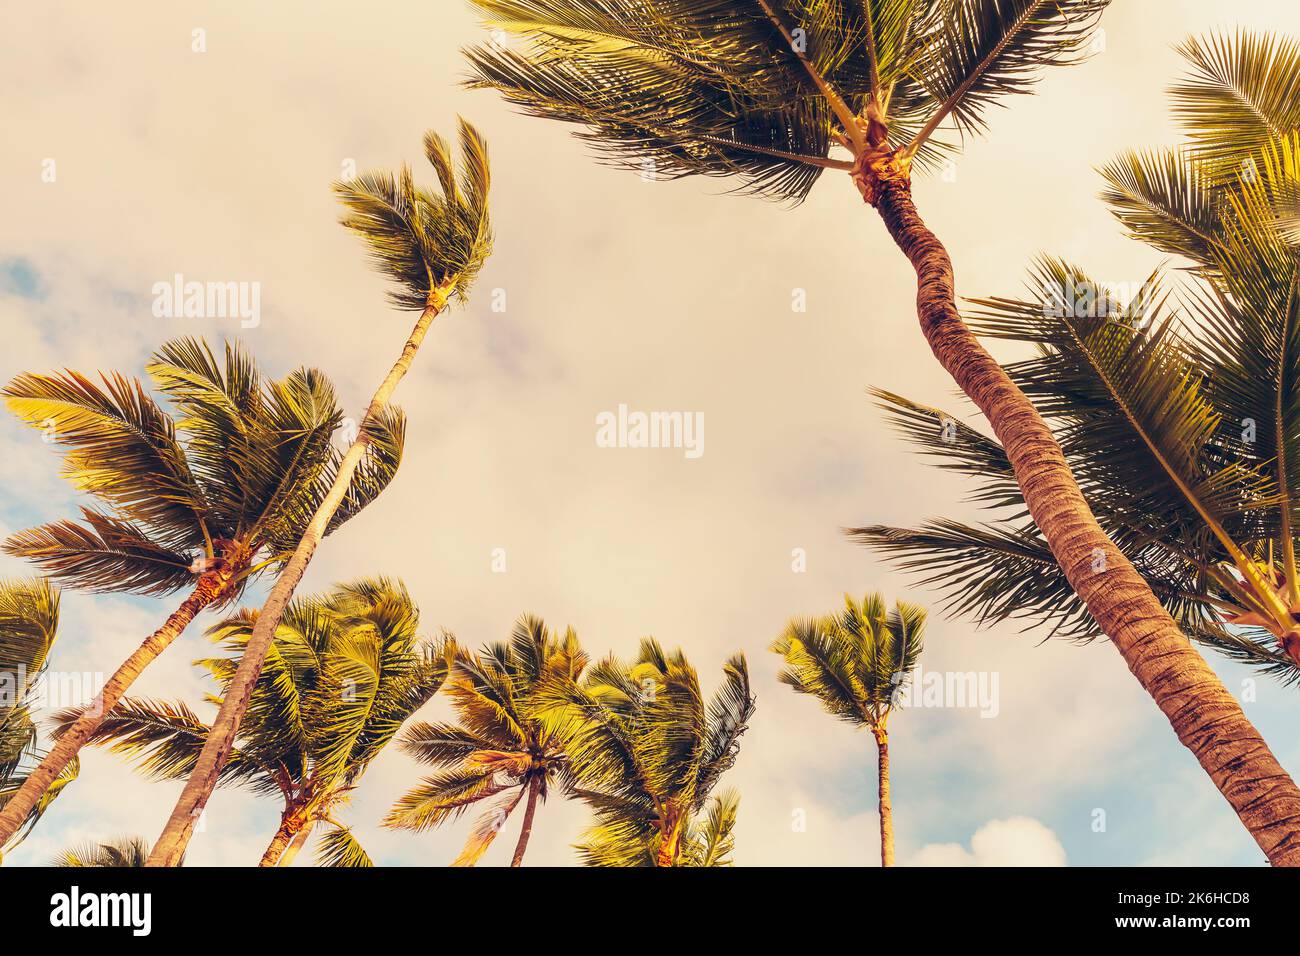 Coconut palm trees on wind are under cloudy sky on a daytime. Vintage stylized photo with tonal correction filter effect Stock Photo